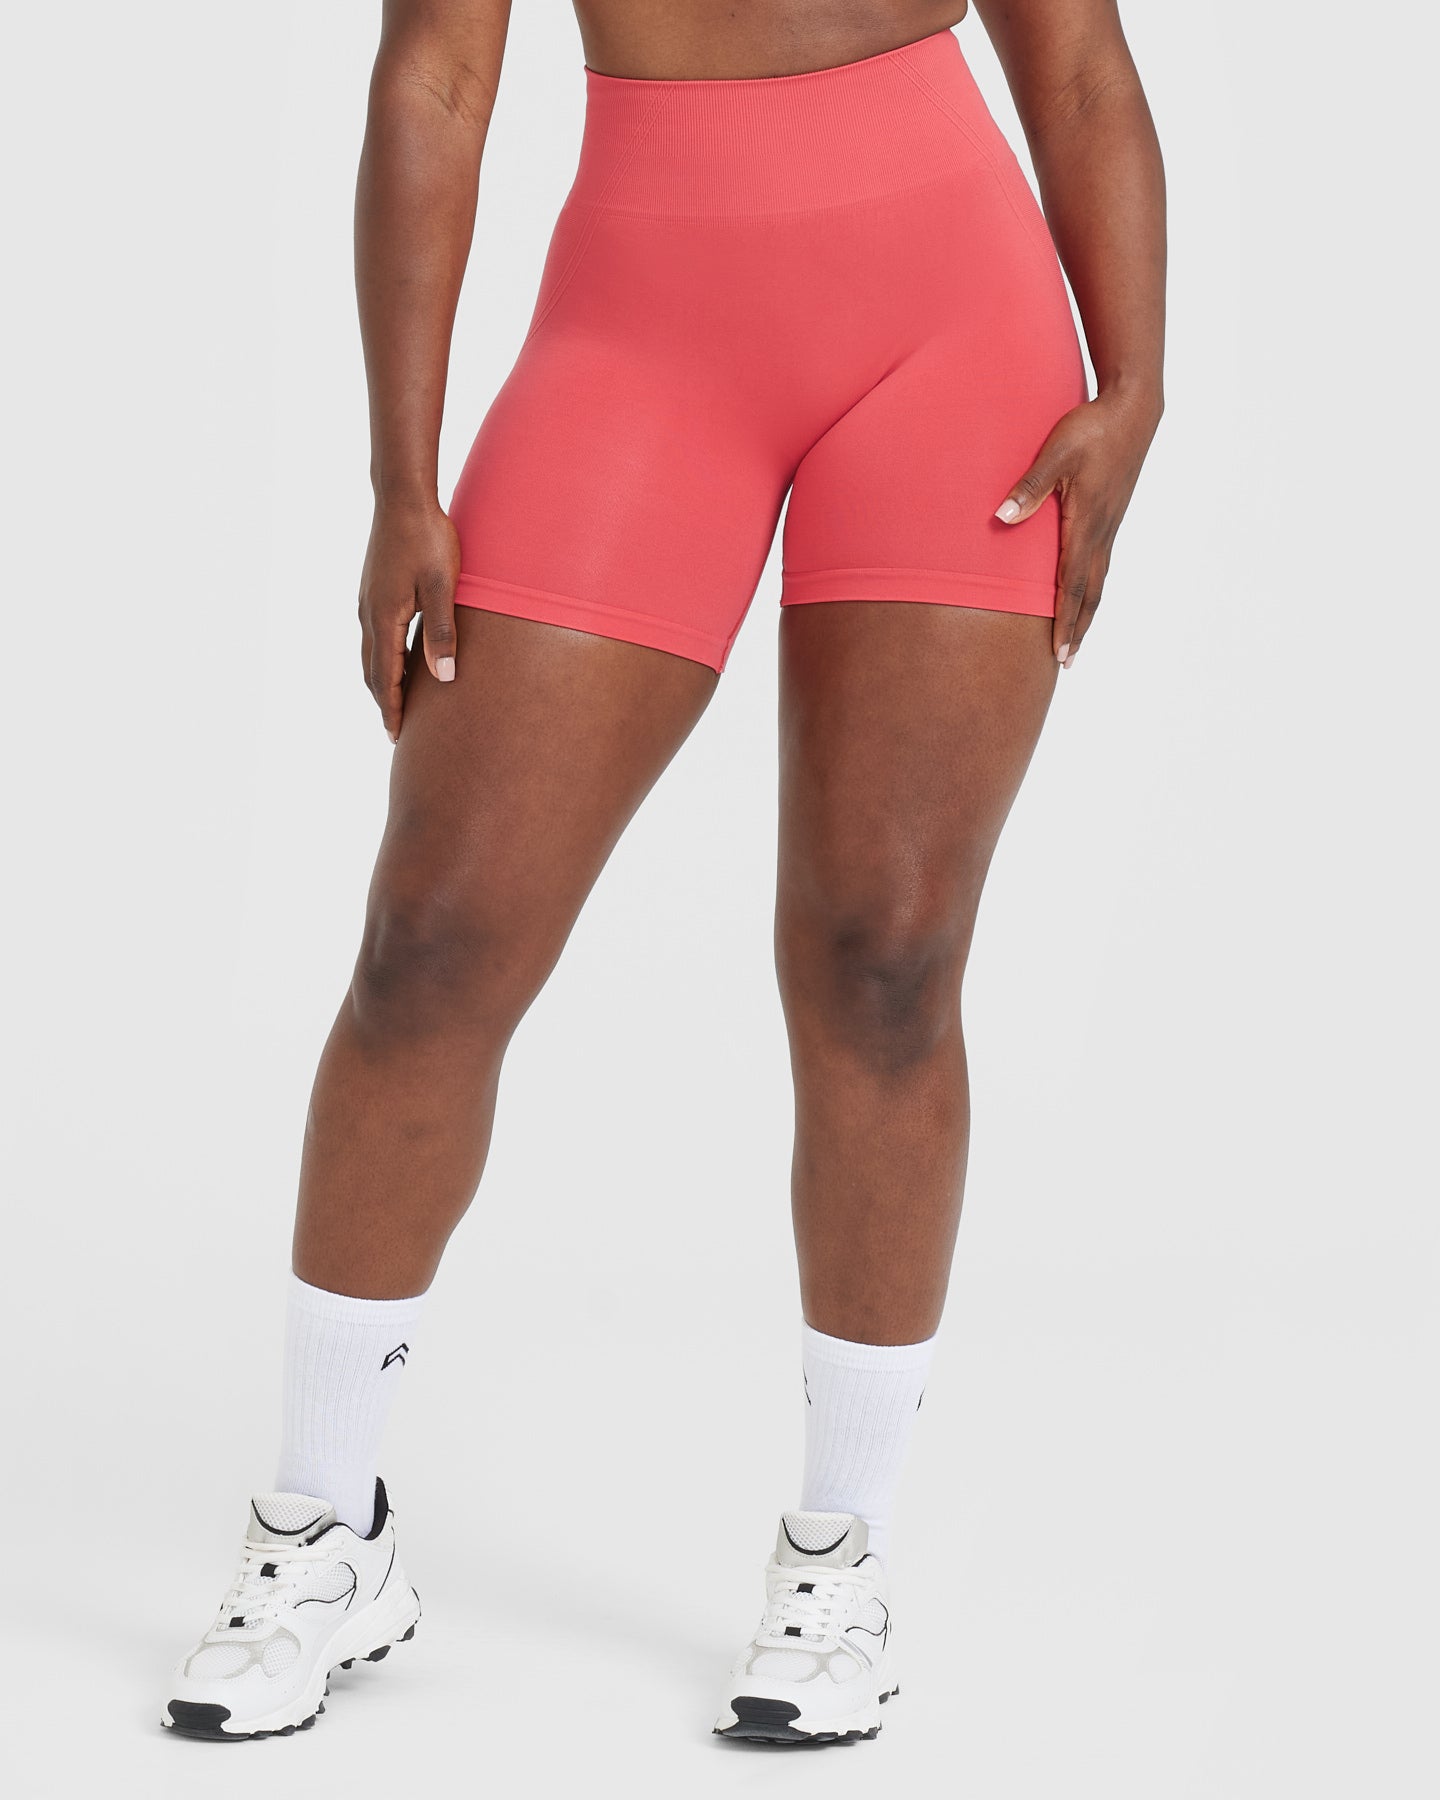 Impact Sports Bra and Effortless Shorts in Sweet Tart